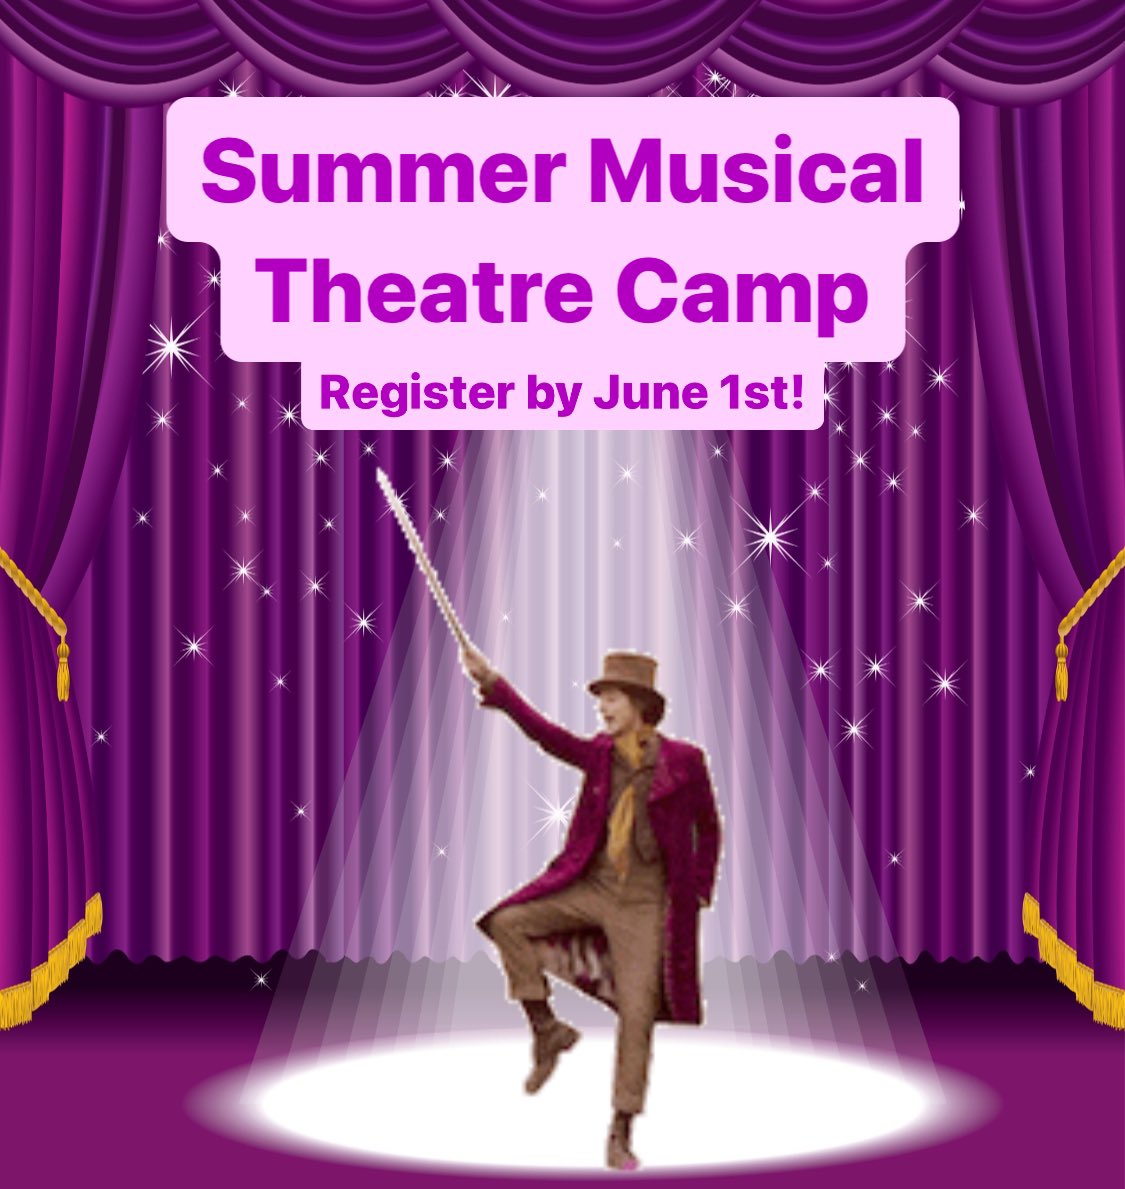 DO YOU HAVE A GOLDEN TICKET? We can’t wait to see you at our Summer Musical Theatre Camp production of “Roald Dahl’s Willy Wonka JR.”! It’s going to be magical! Register by June 1st! ahhabroadway.org/camp2024/#summ… #musicaltheatre #broadway #willywonka #makenewfriends